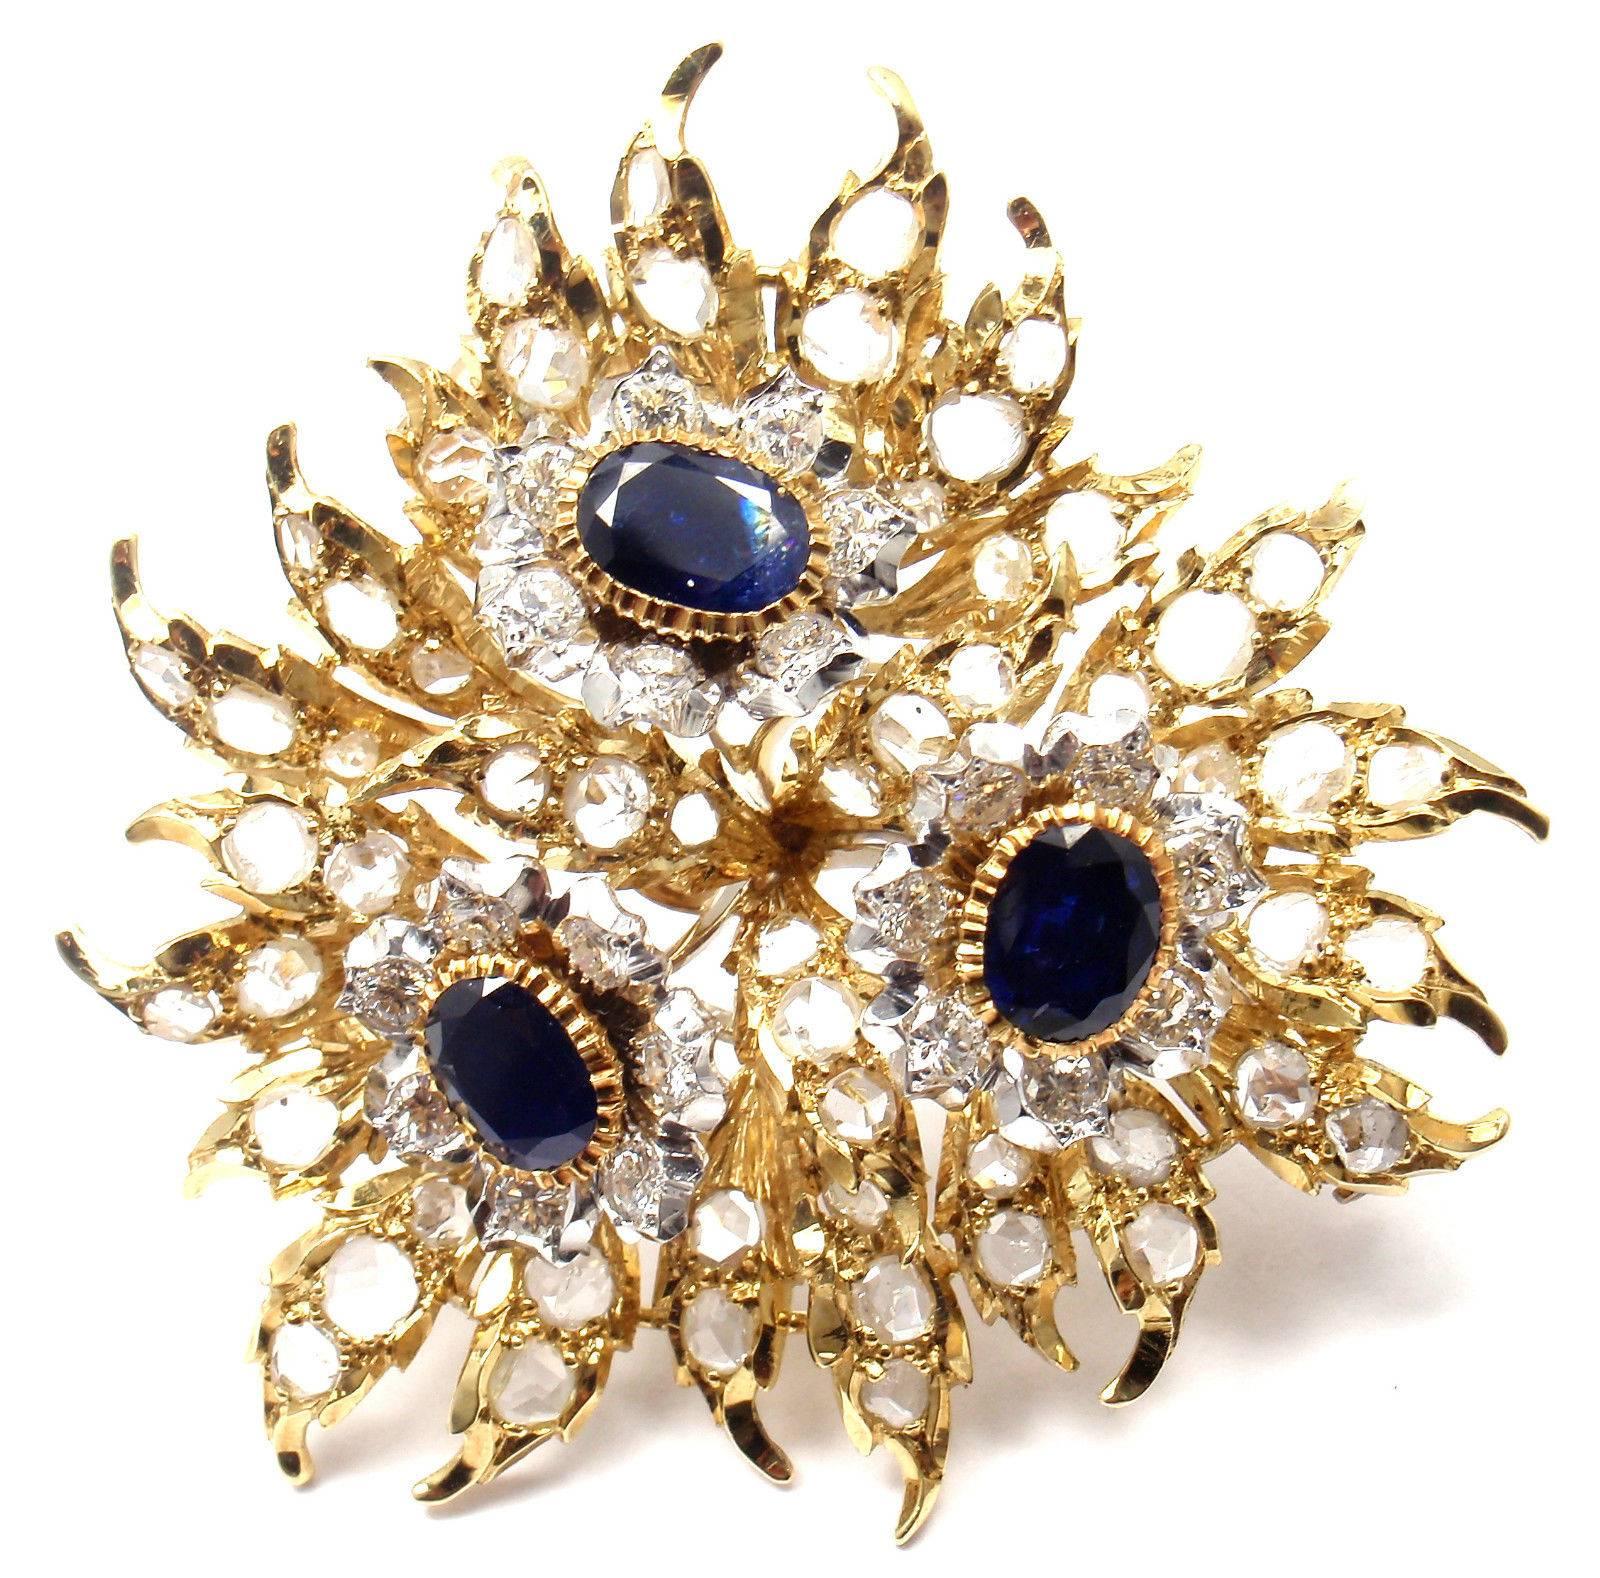 18k Yellow Gold 6ct Diamond Sapphire Pin Brooch Pin by Buccellati.  
With 21 brilliant cut diamonds VS1 clarity, G color total weight approx. 1.25ct
56 rose cut diamonds total weight approx. 4.75ct
3 sapphires total weight approx. 3ct

Details: